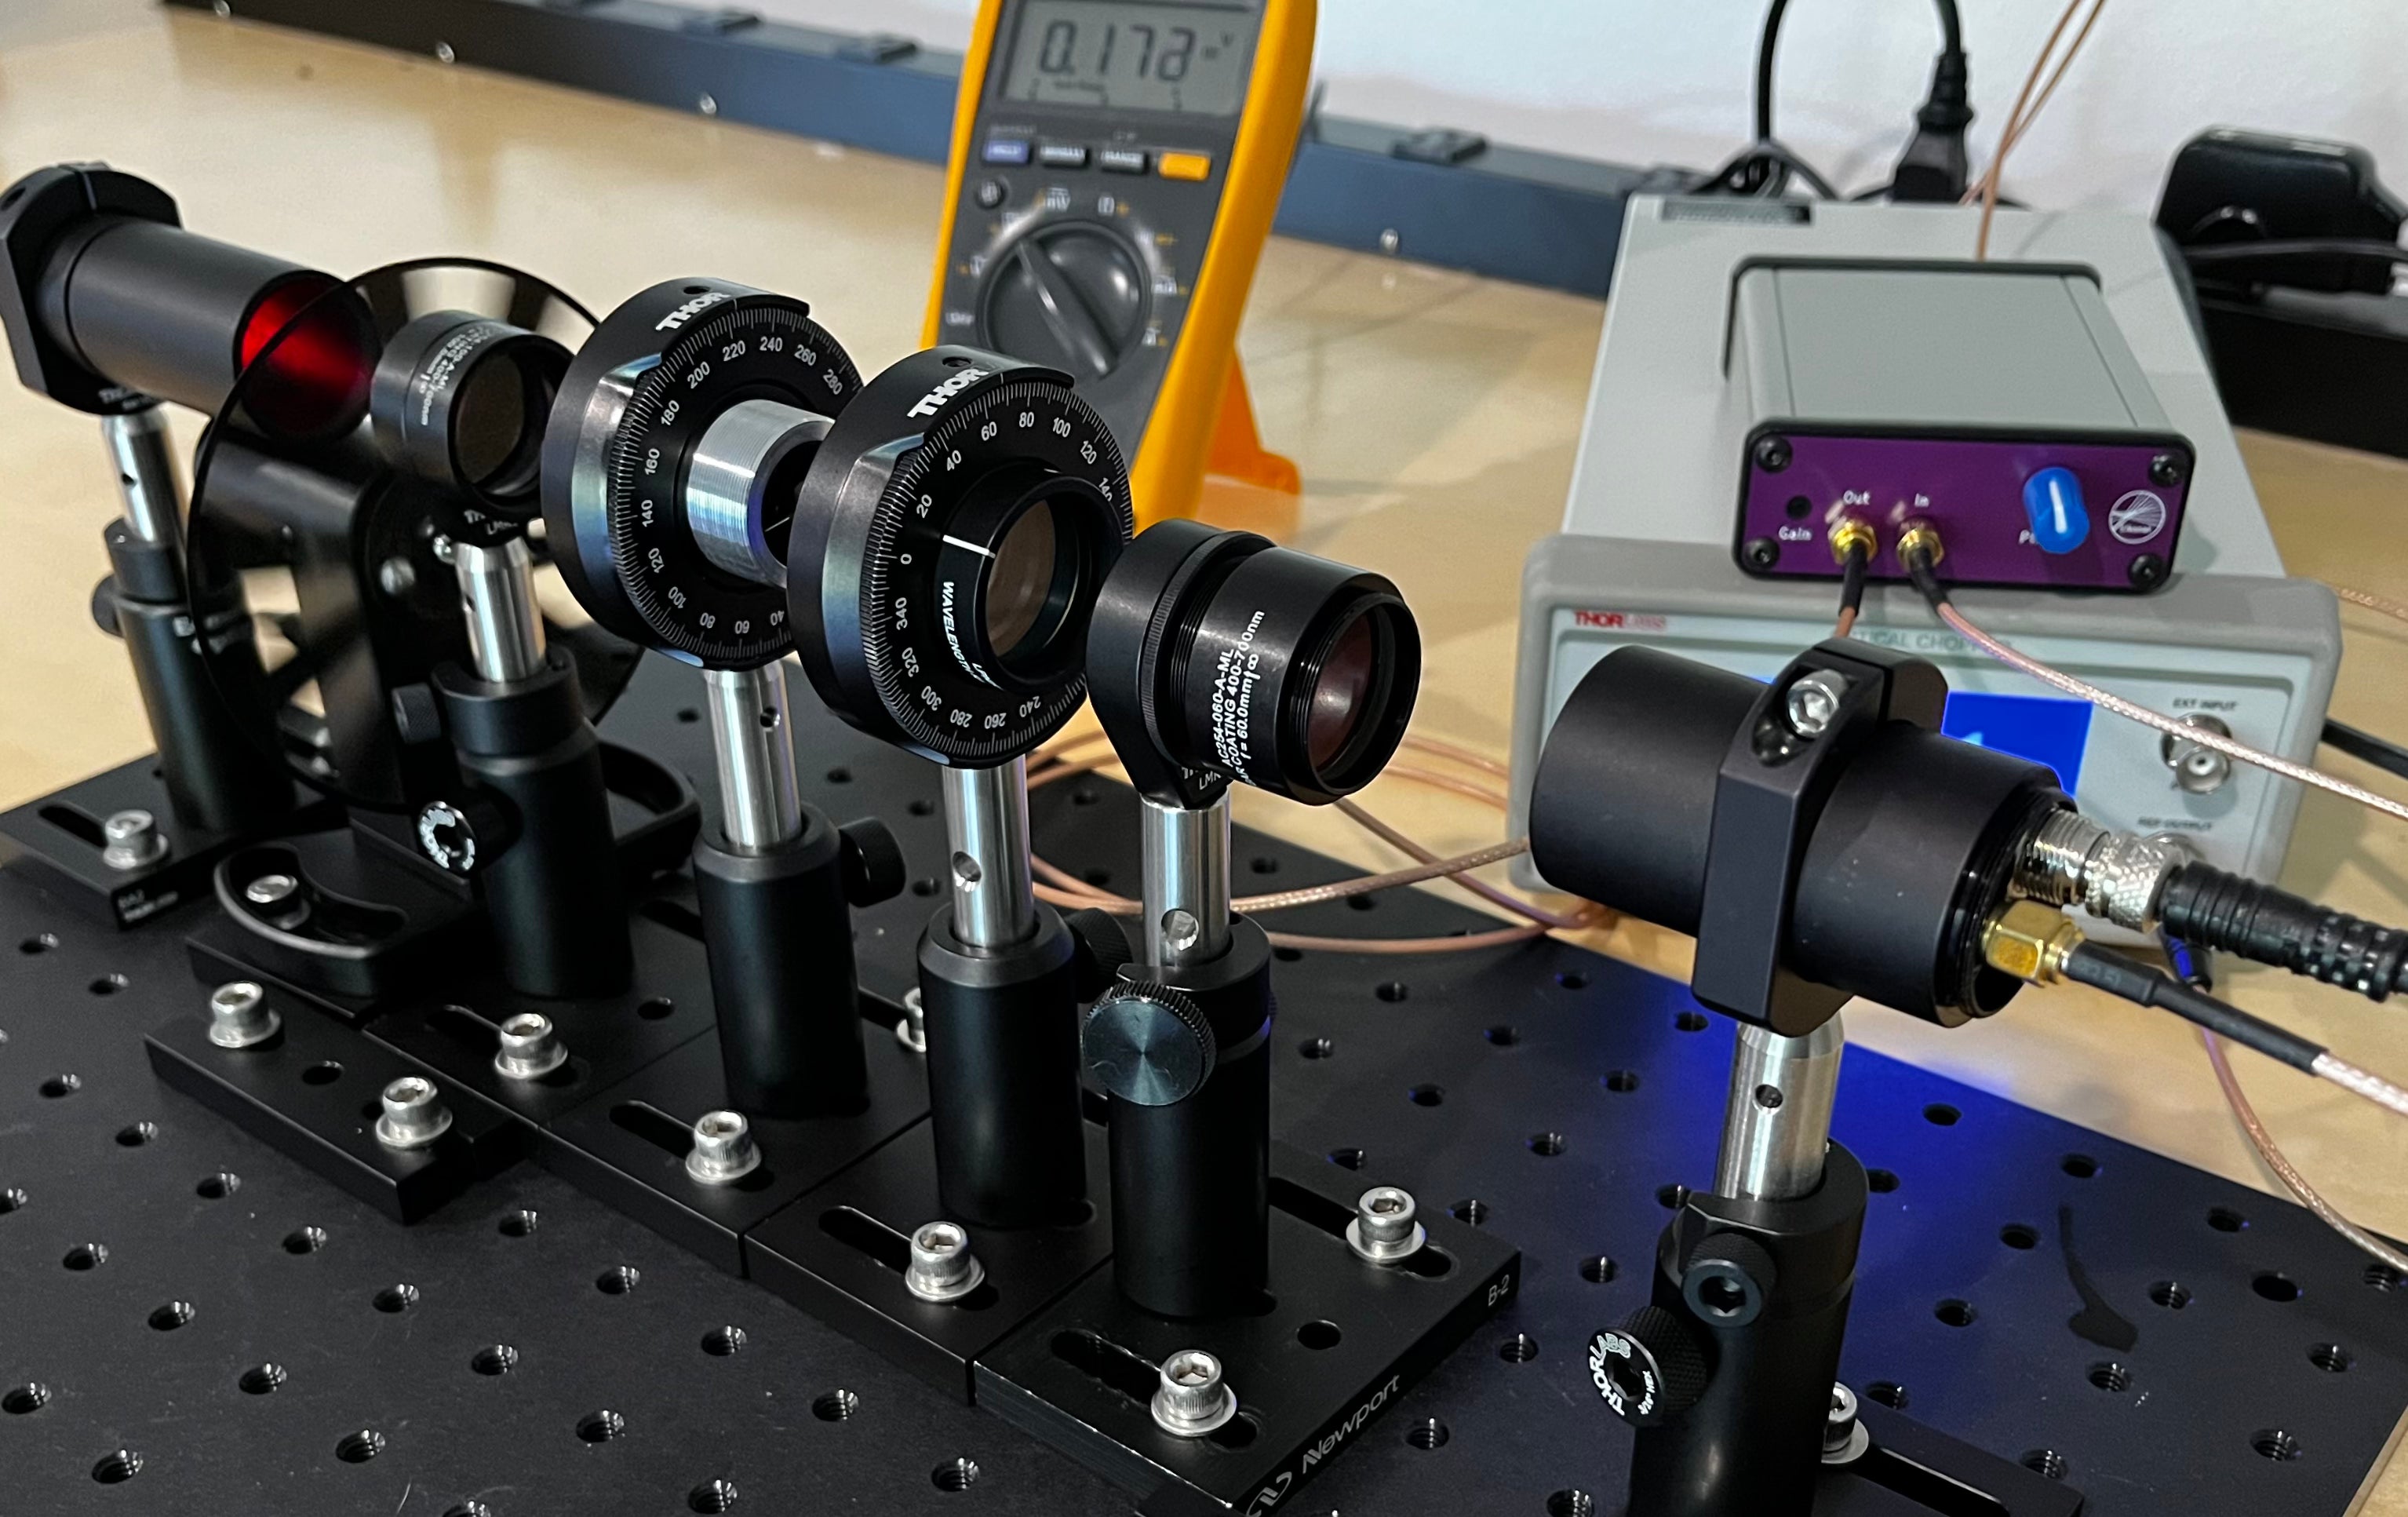 Extinction ratio measurement using an LED point source (LED-01), chopper wheel, crossed polarizers, photodetector (TIA-F-01) and a lock-in amplifier (SA-01).